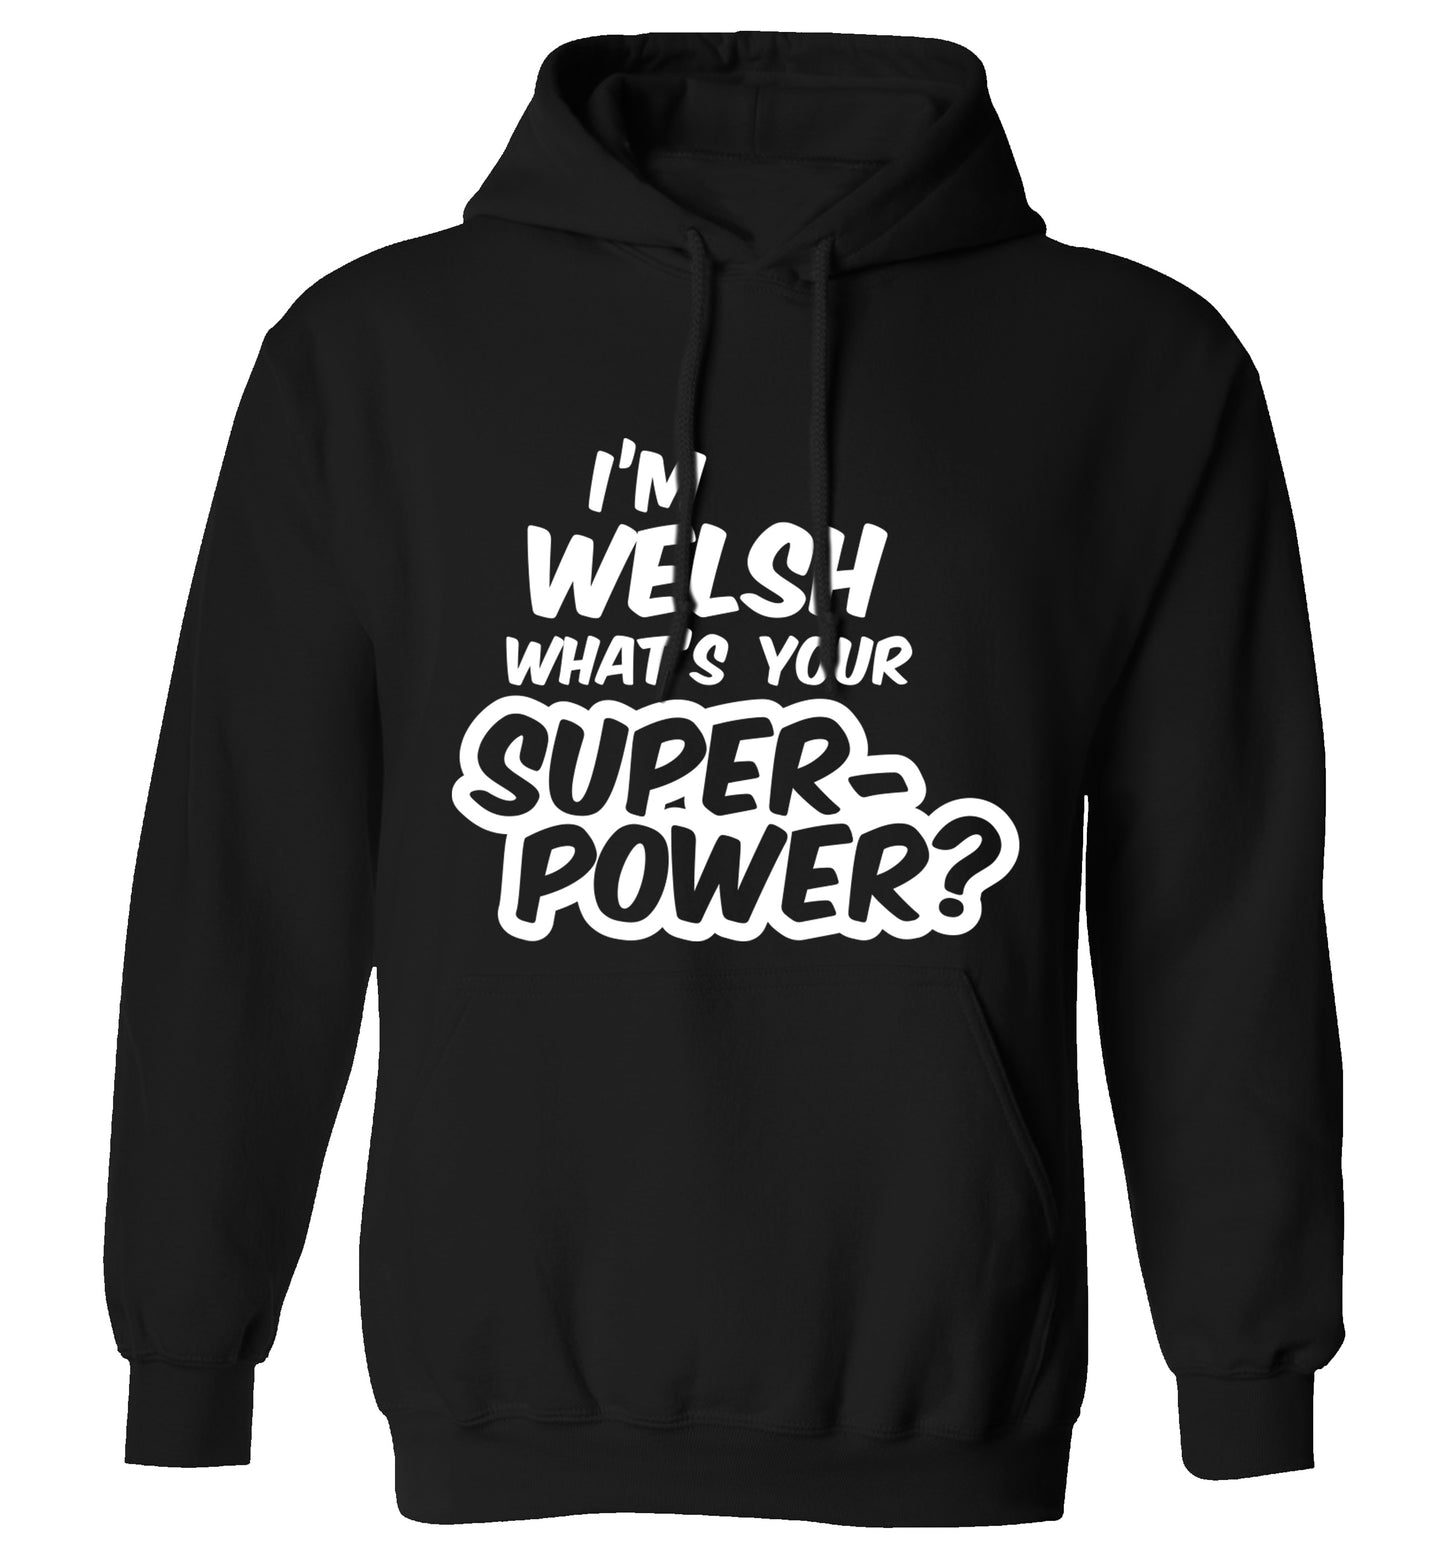 I'm Welsh what's your superpower? adults unisex black hoodie 2XL